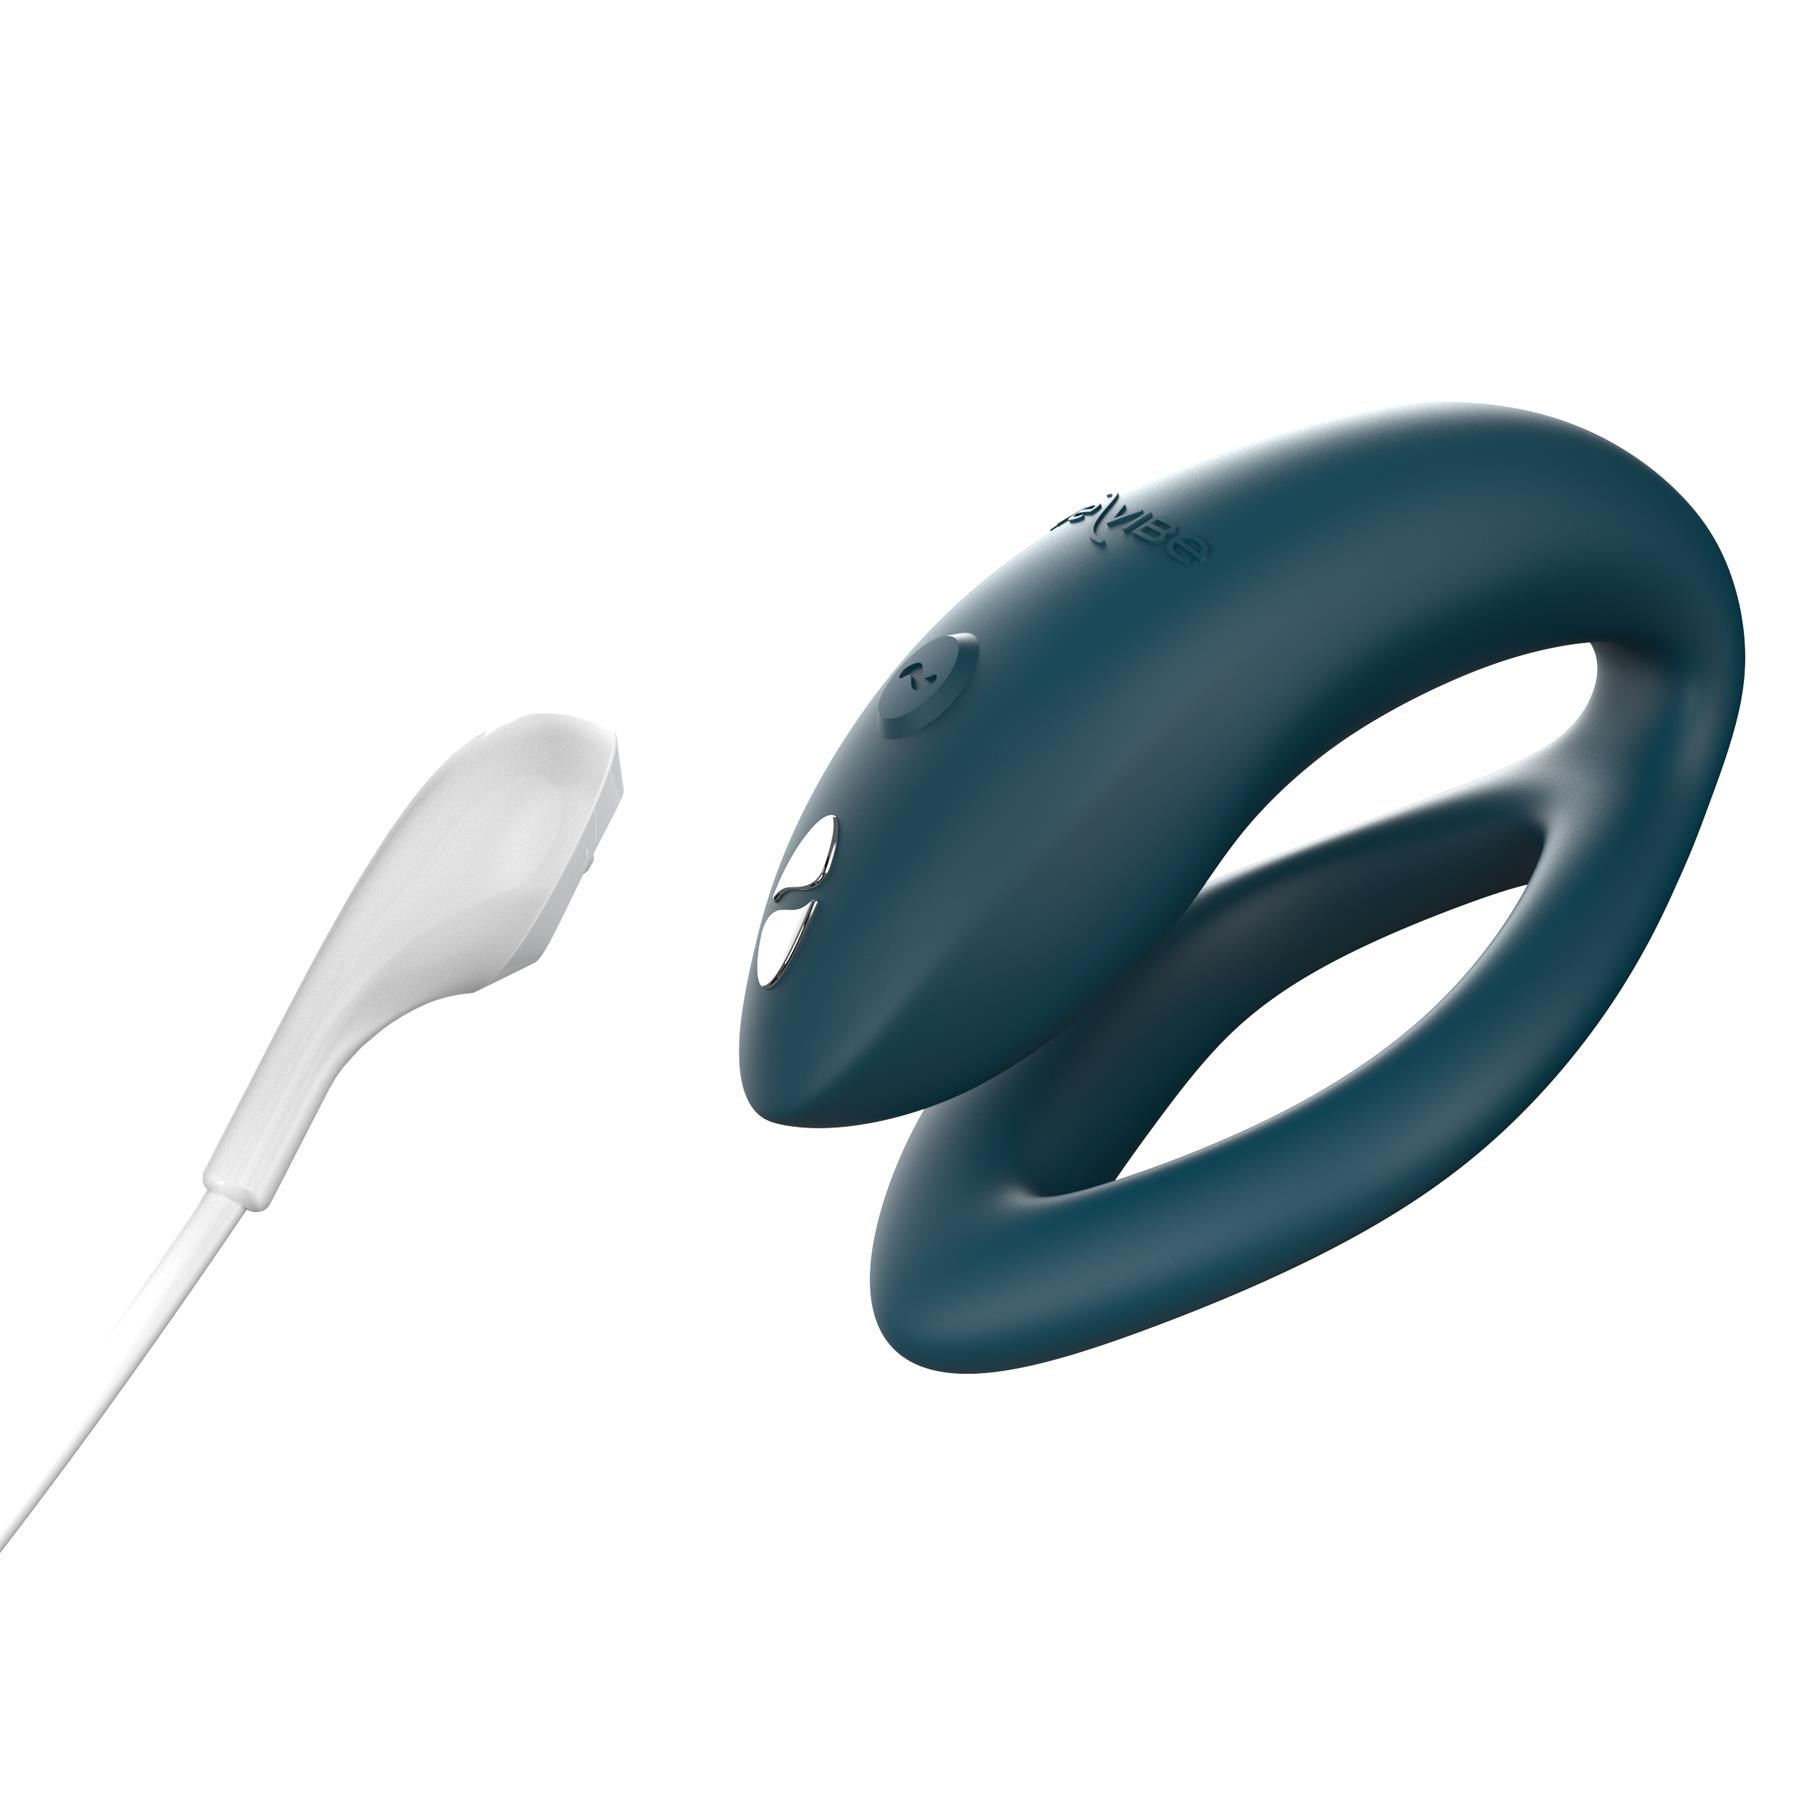 We-Vibe Sync O Couples Vibrator- Showing Where Charging Cable is Placed